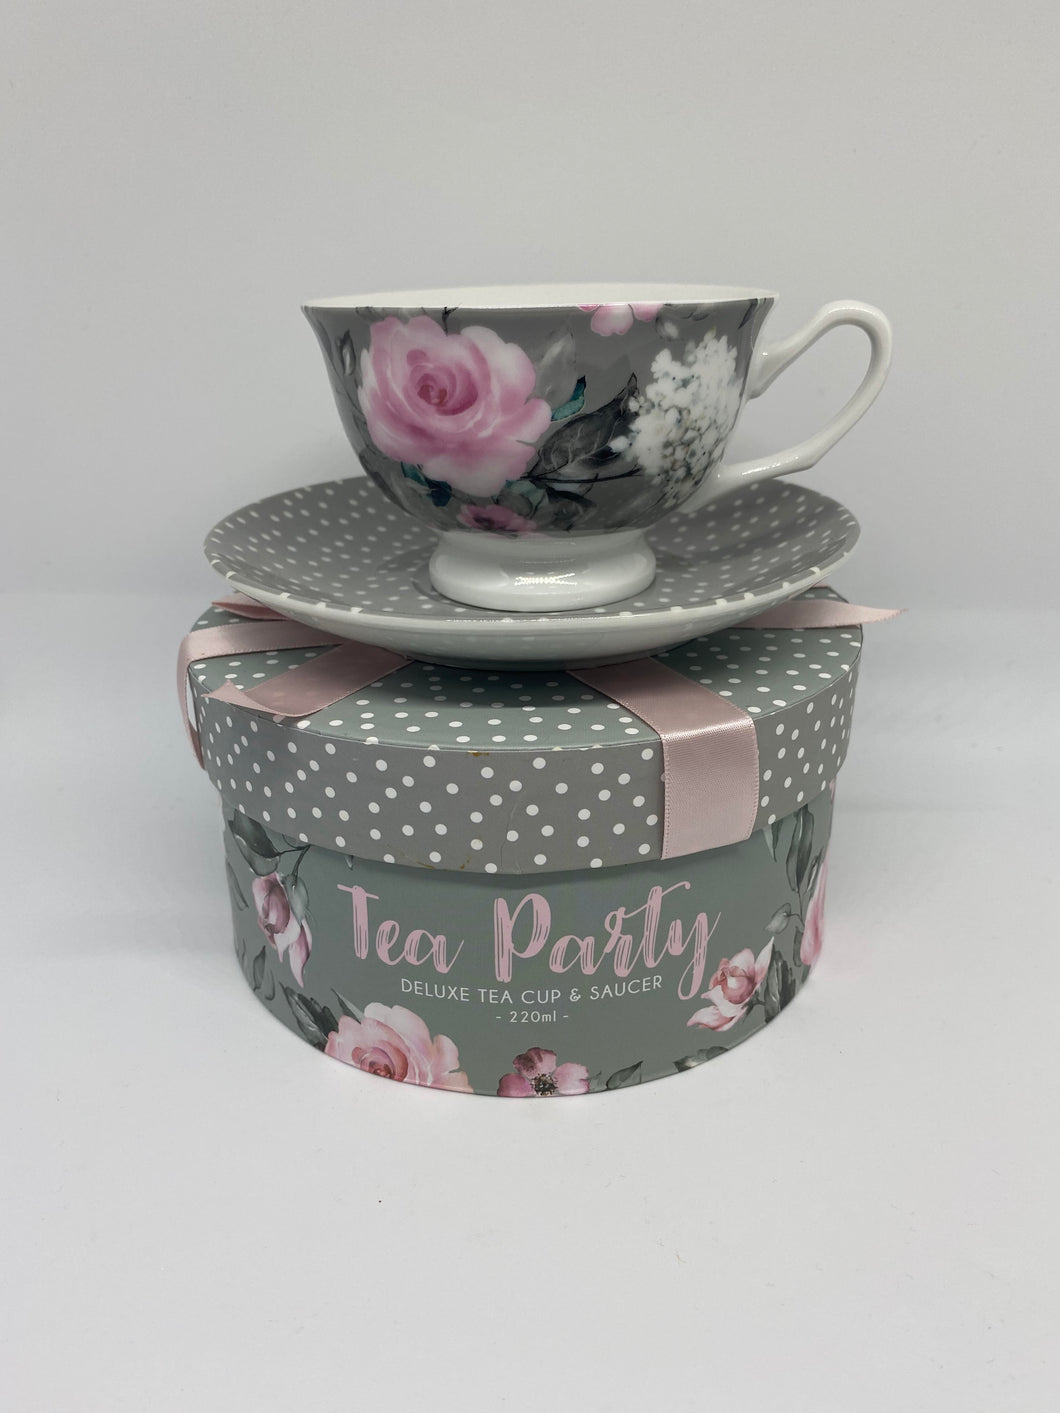 Deluxe Tea Party Tea cup and saucer